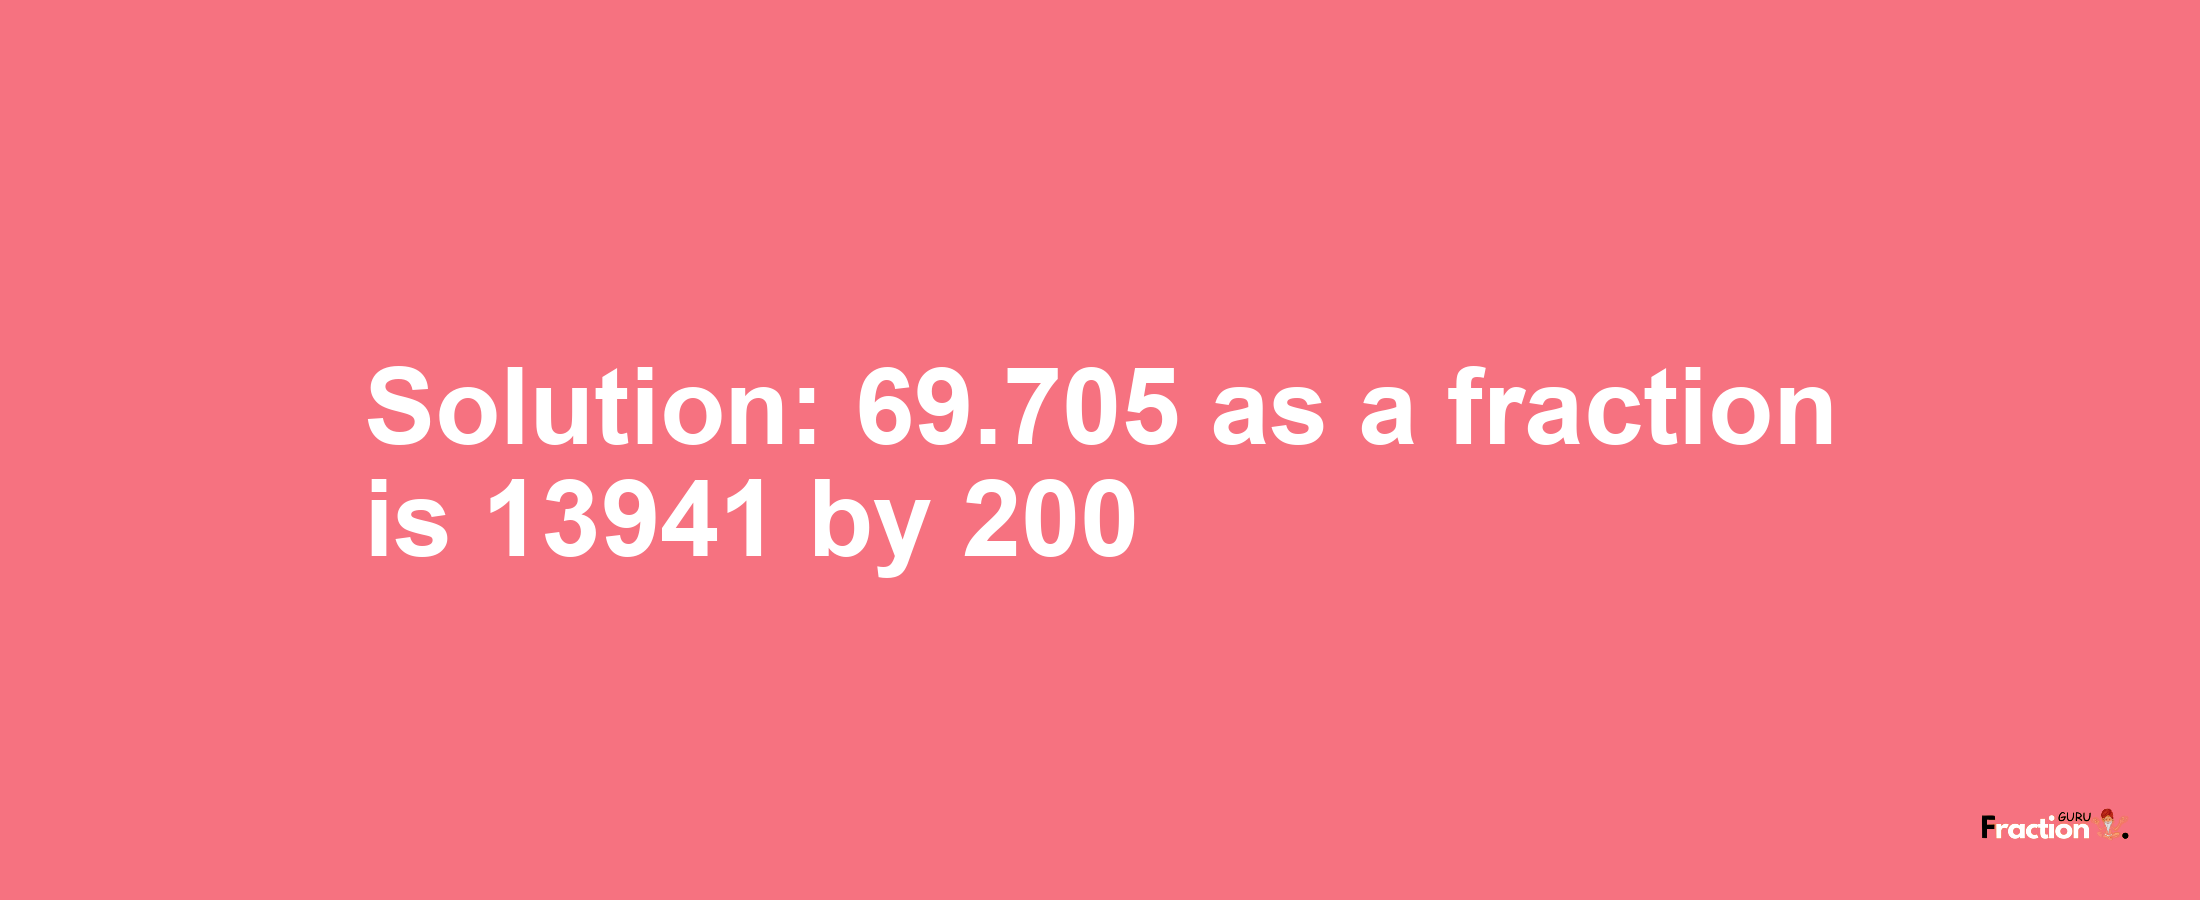 Solution:69.705 as a fraction is 13941/200